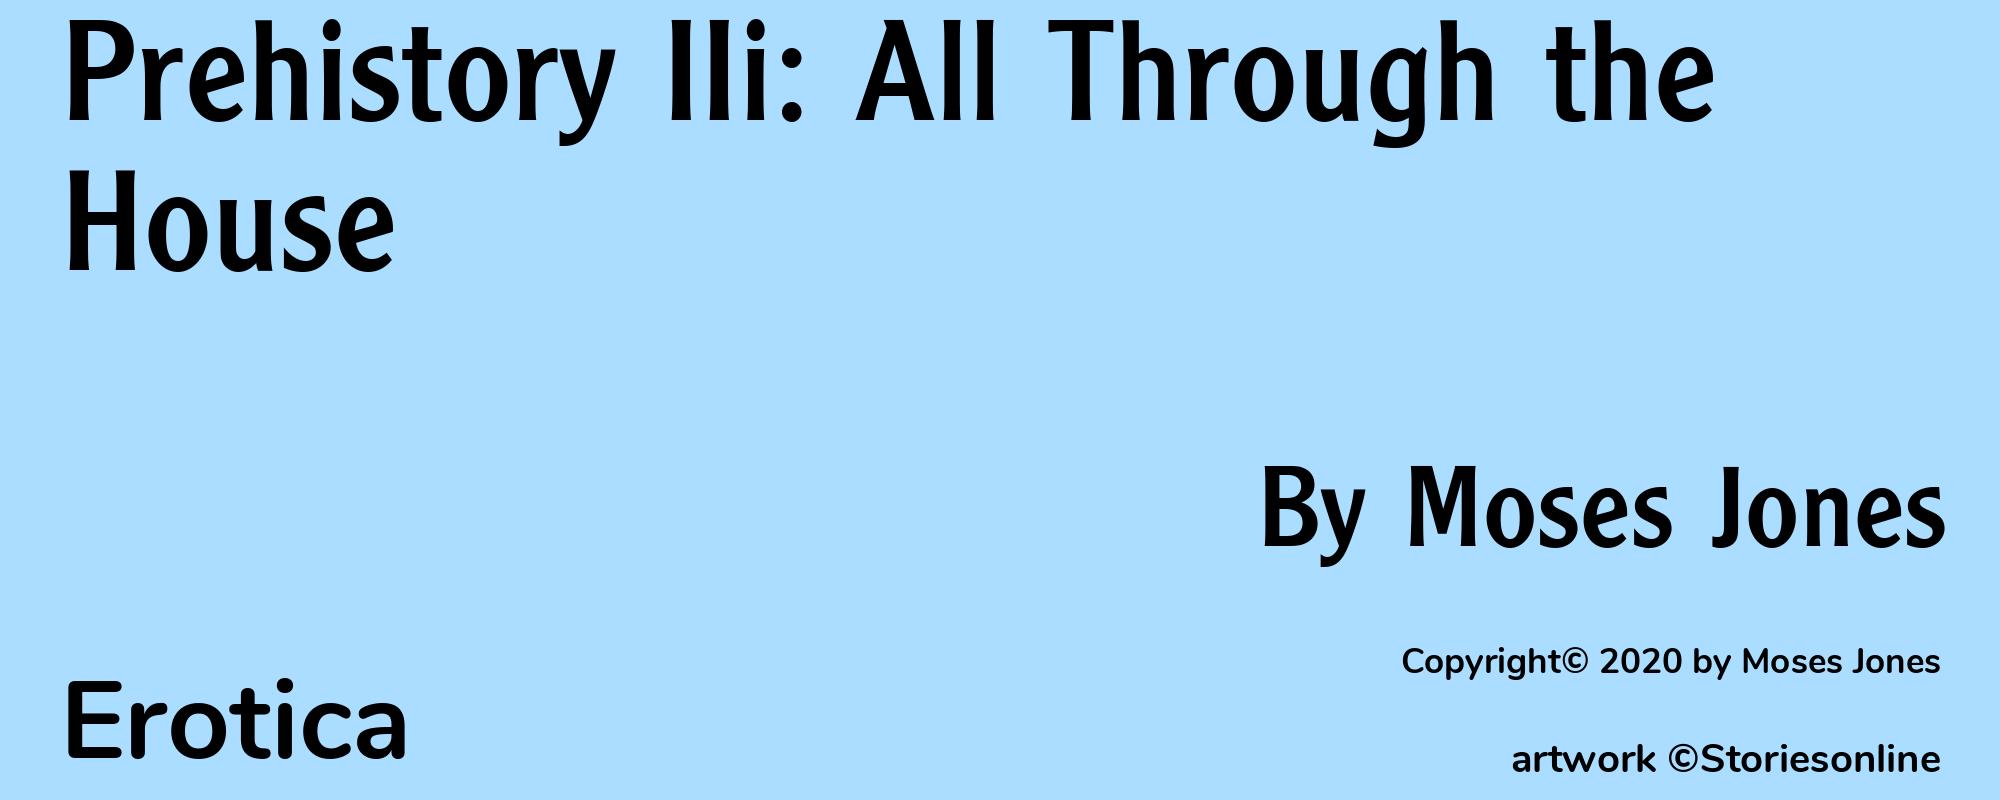 Prehistory IIi: All Through the House - Cover